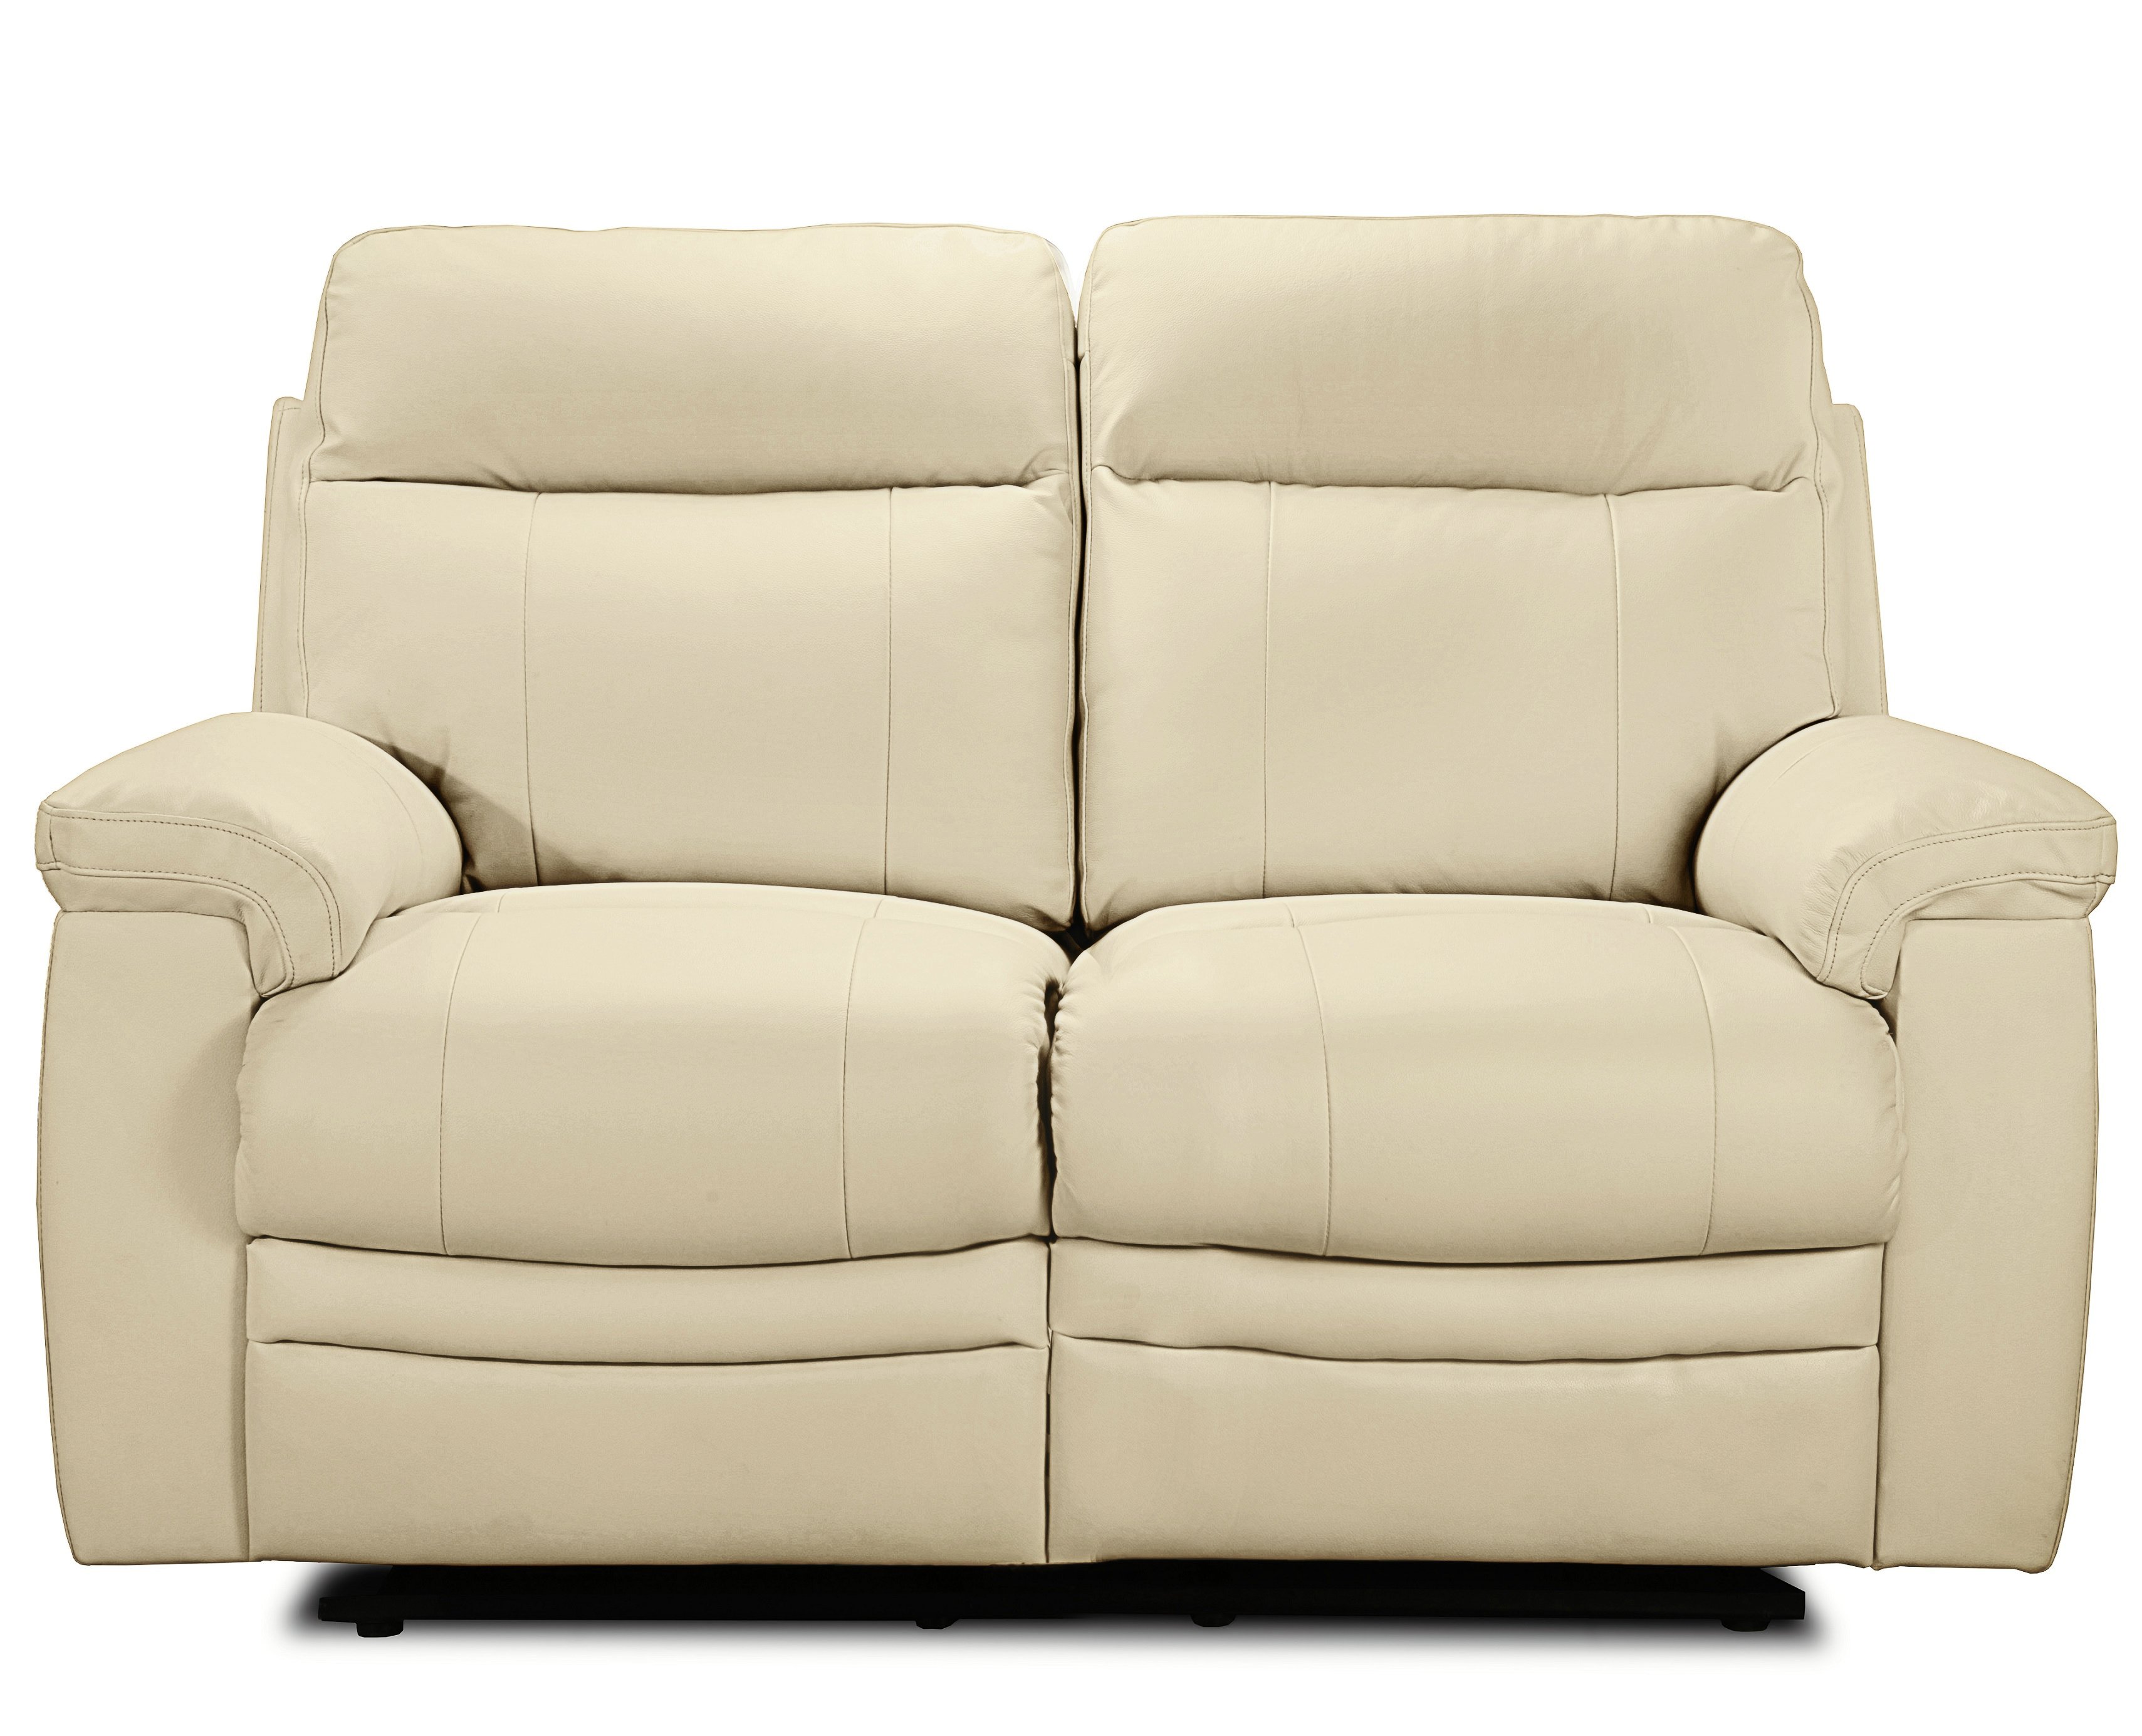 Argos Home New Paolo 2 Seater Manual Recliner Sofa Reviews